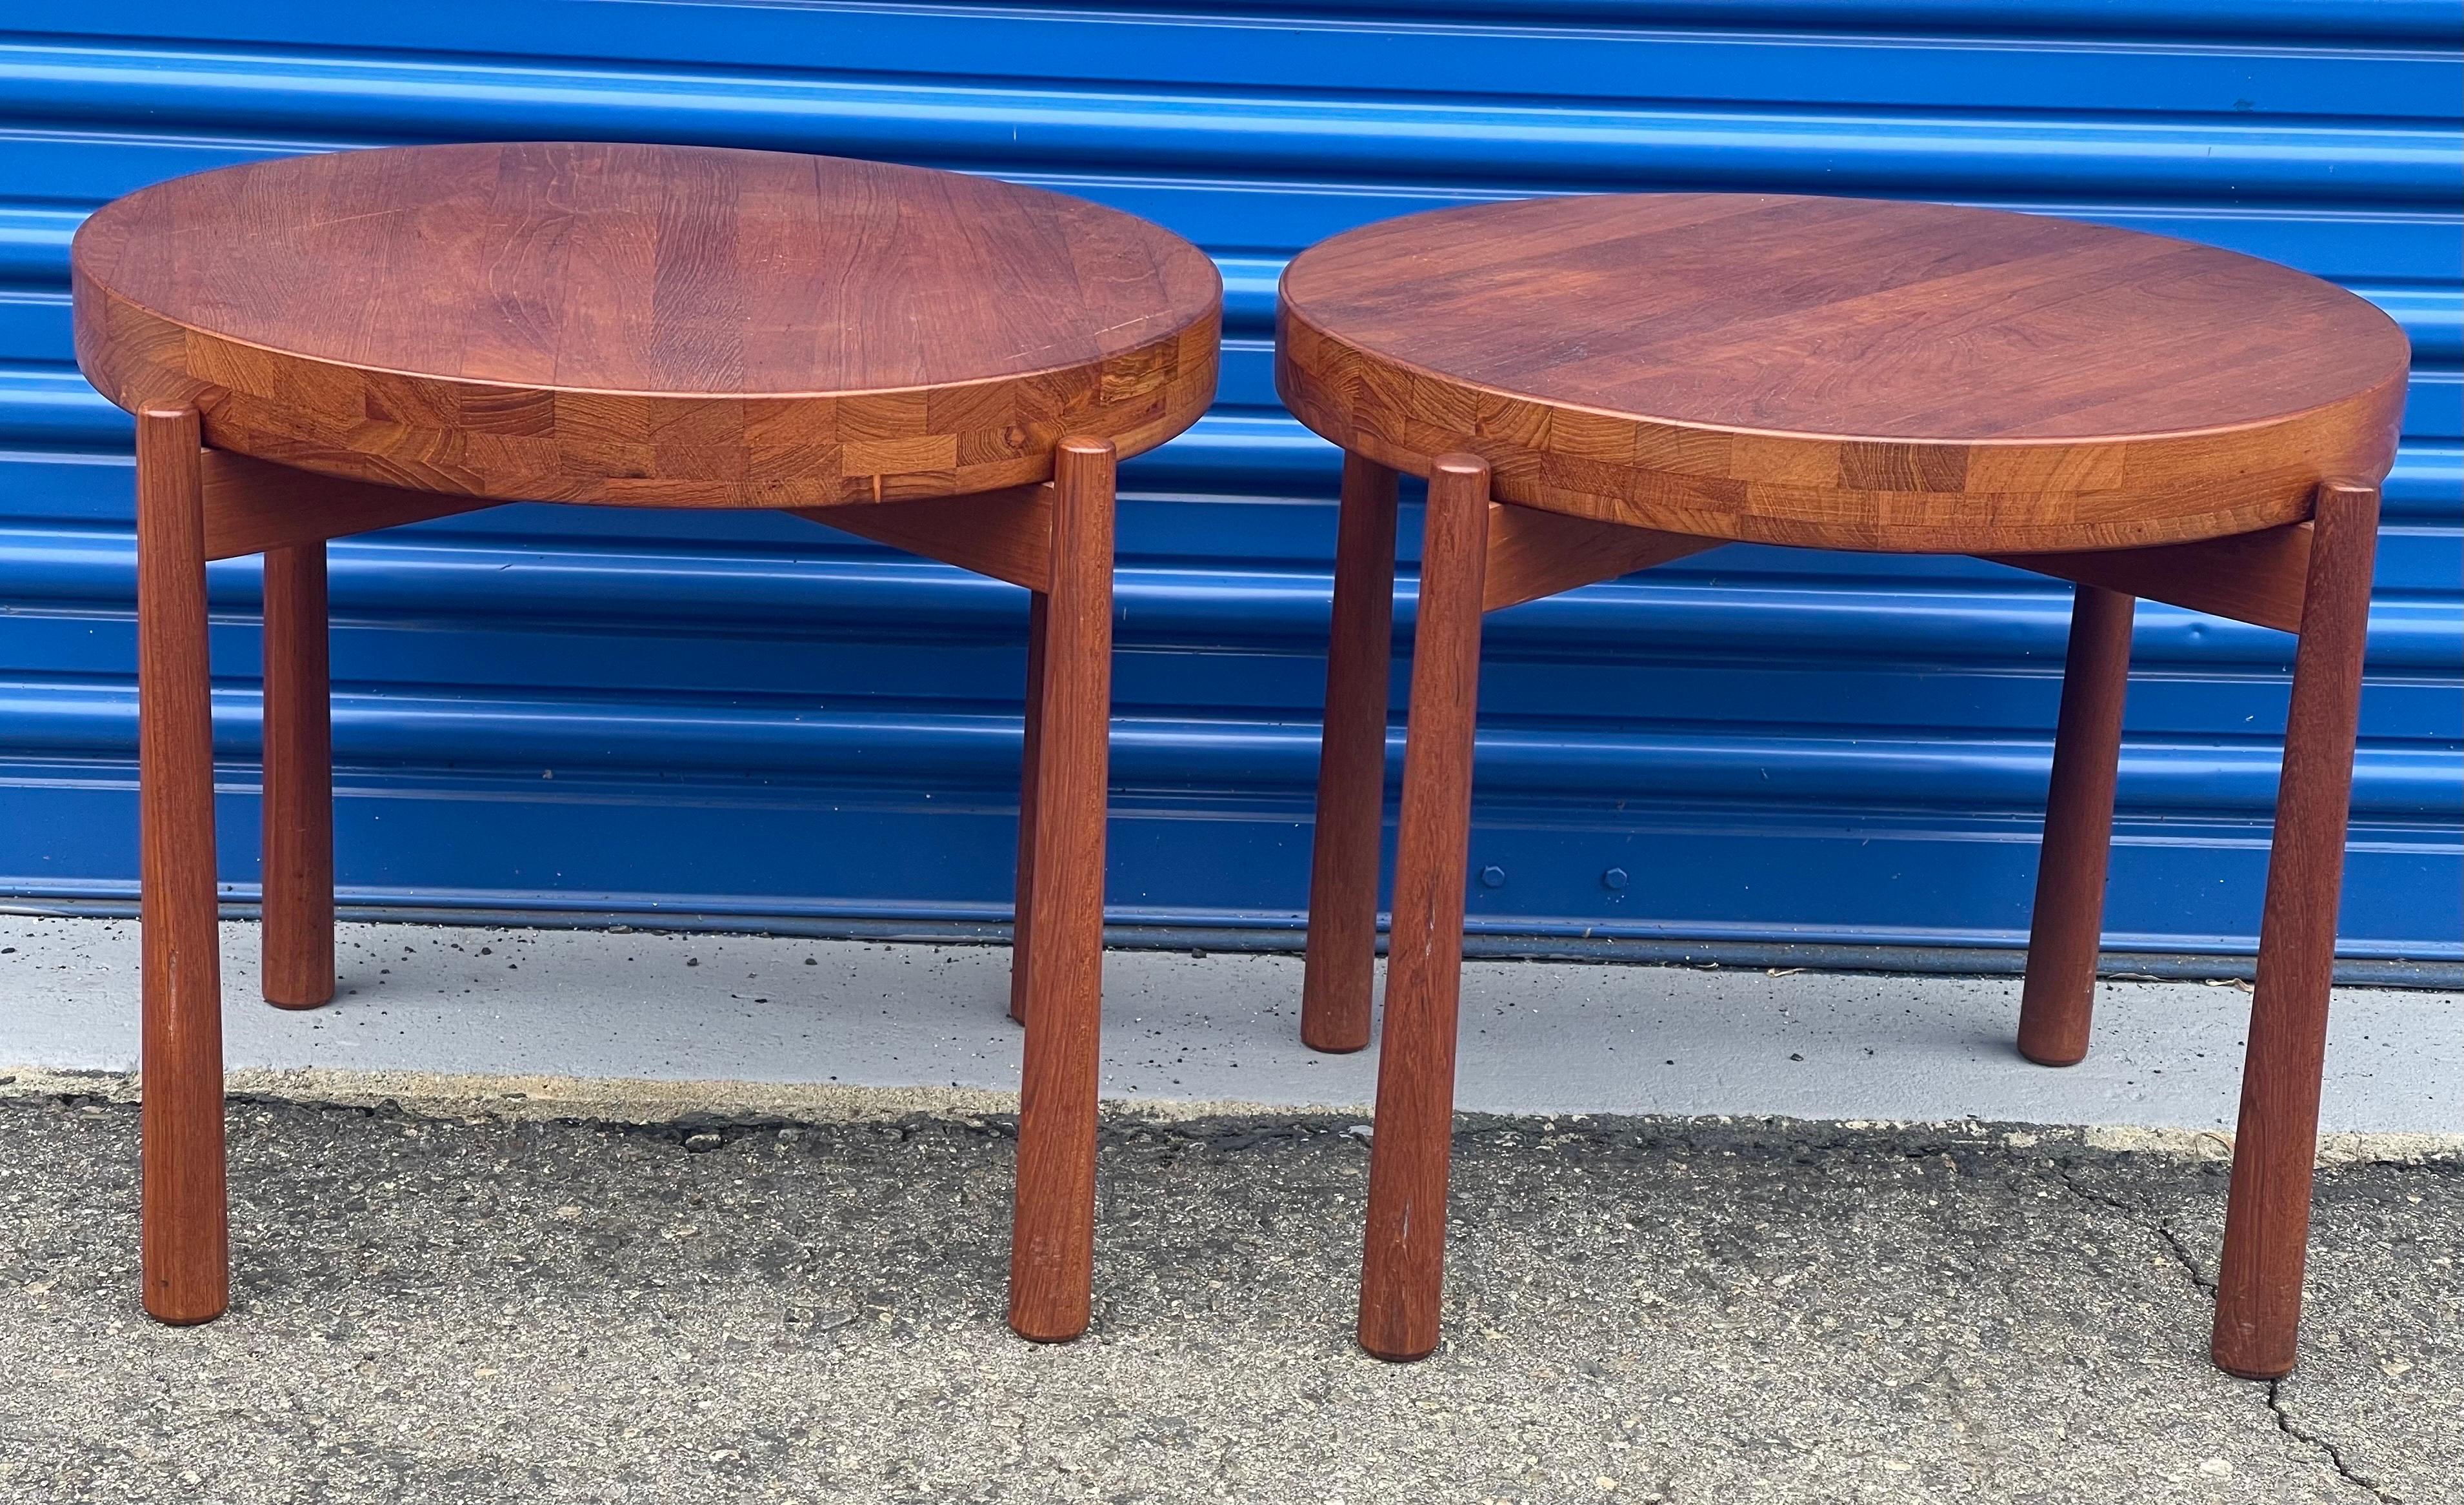 Pair of Teak Tray Side Tables Attributed to Jens Quistgaard for DUX of Sweden For Sale 4